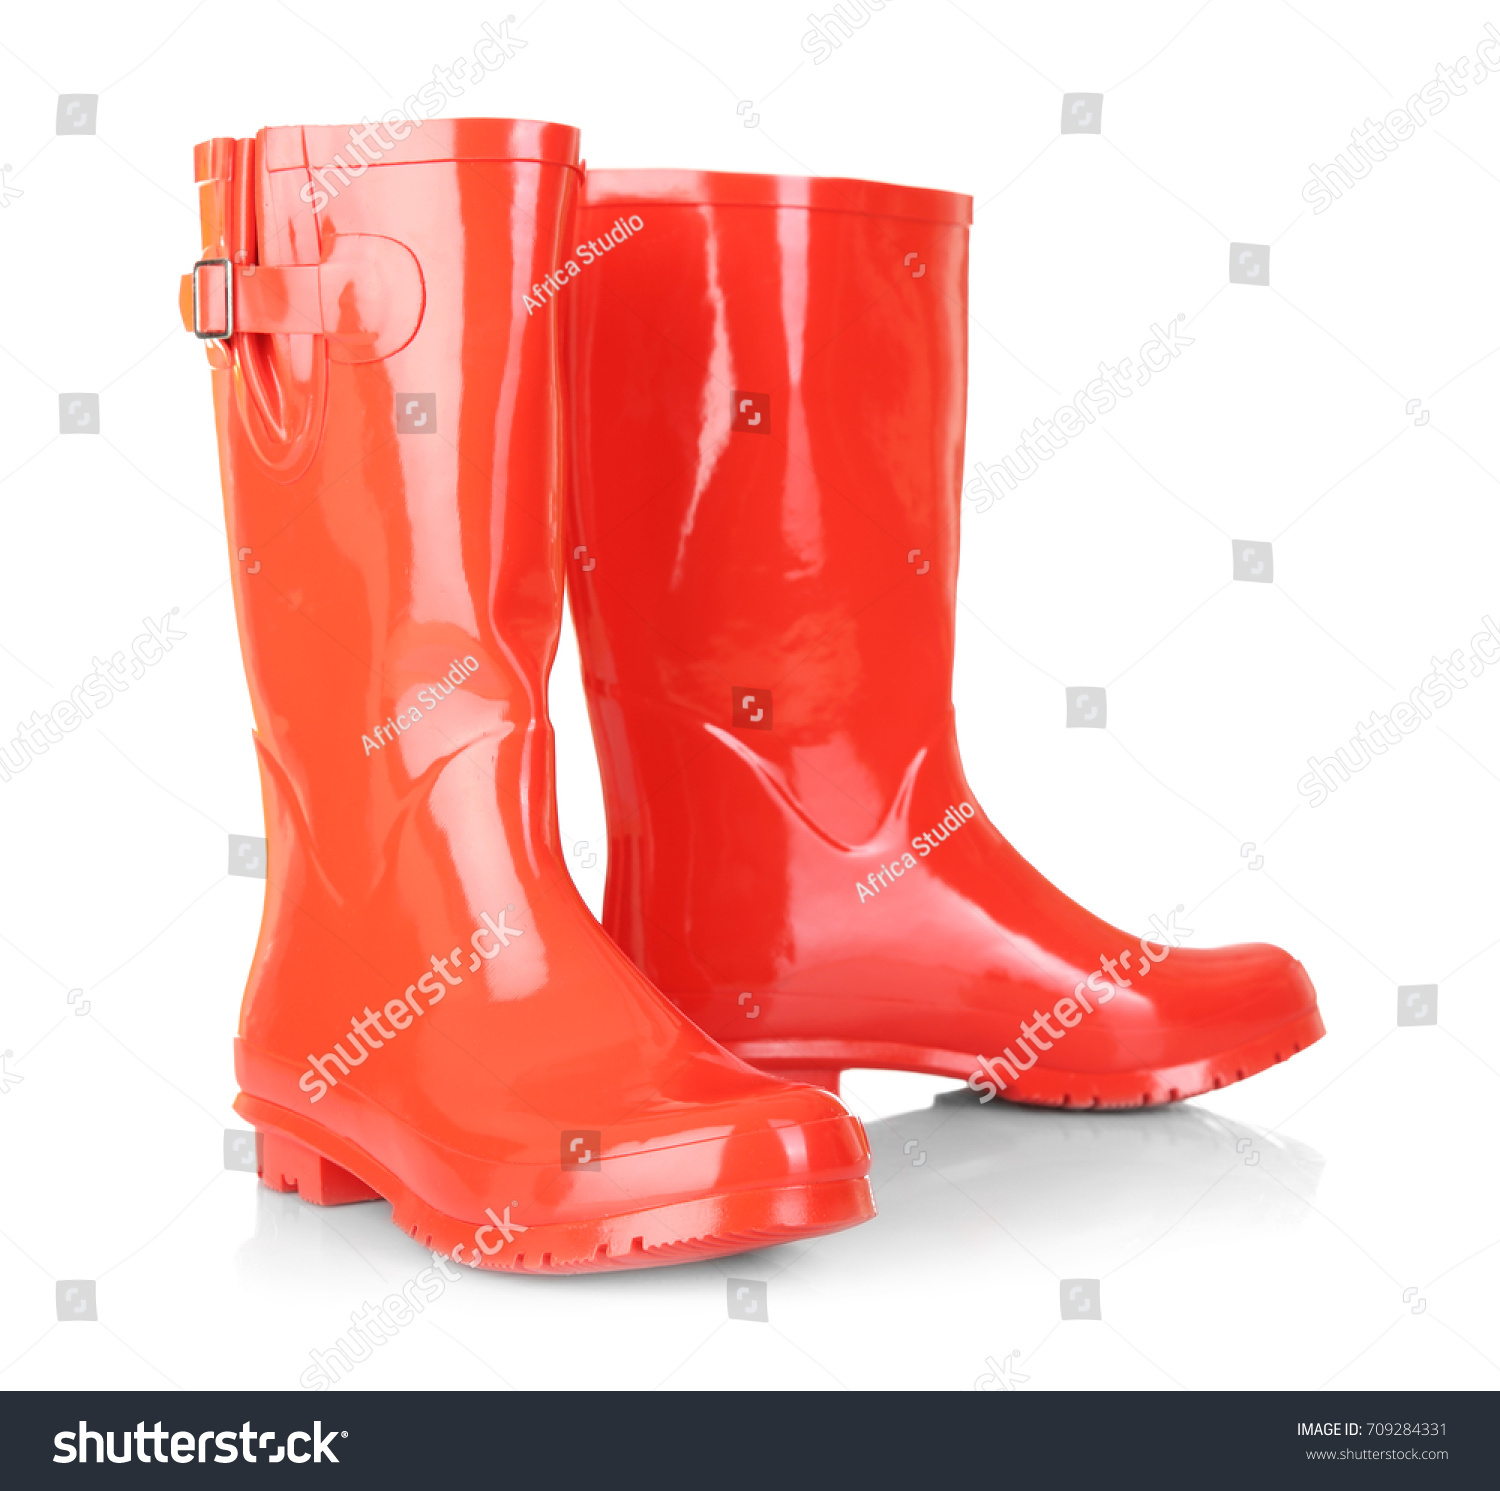 1,329 Red galoshes Images, Stock Photos & Vectors | Shutterstock